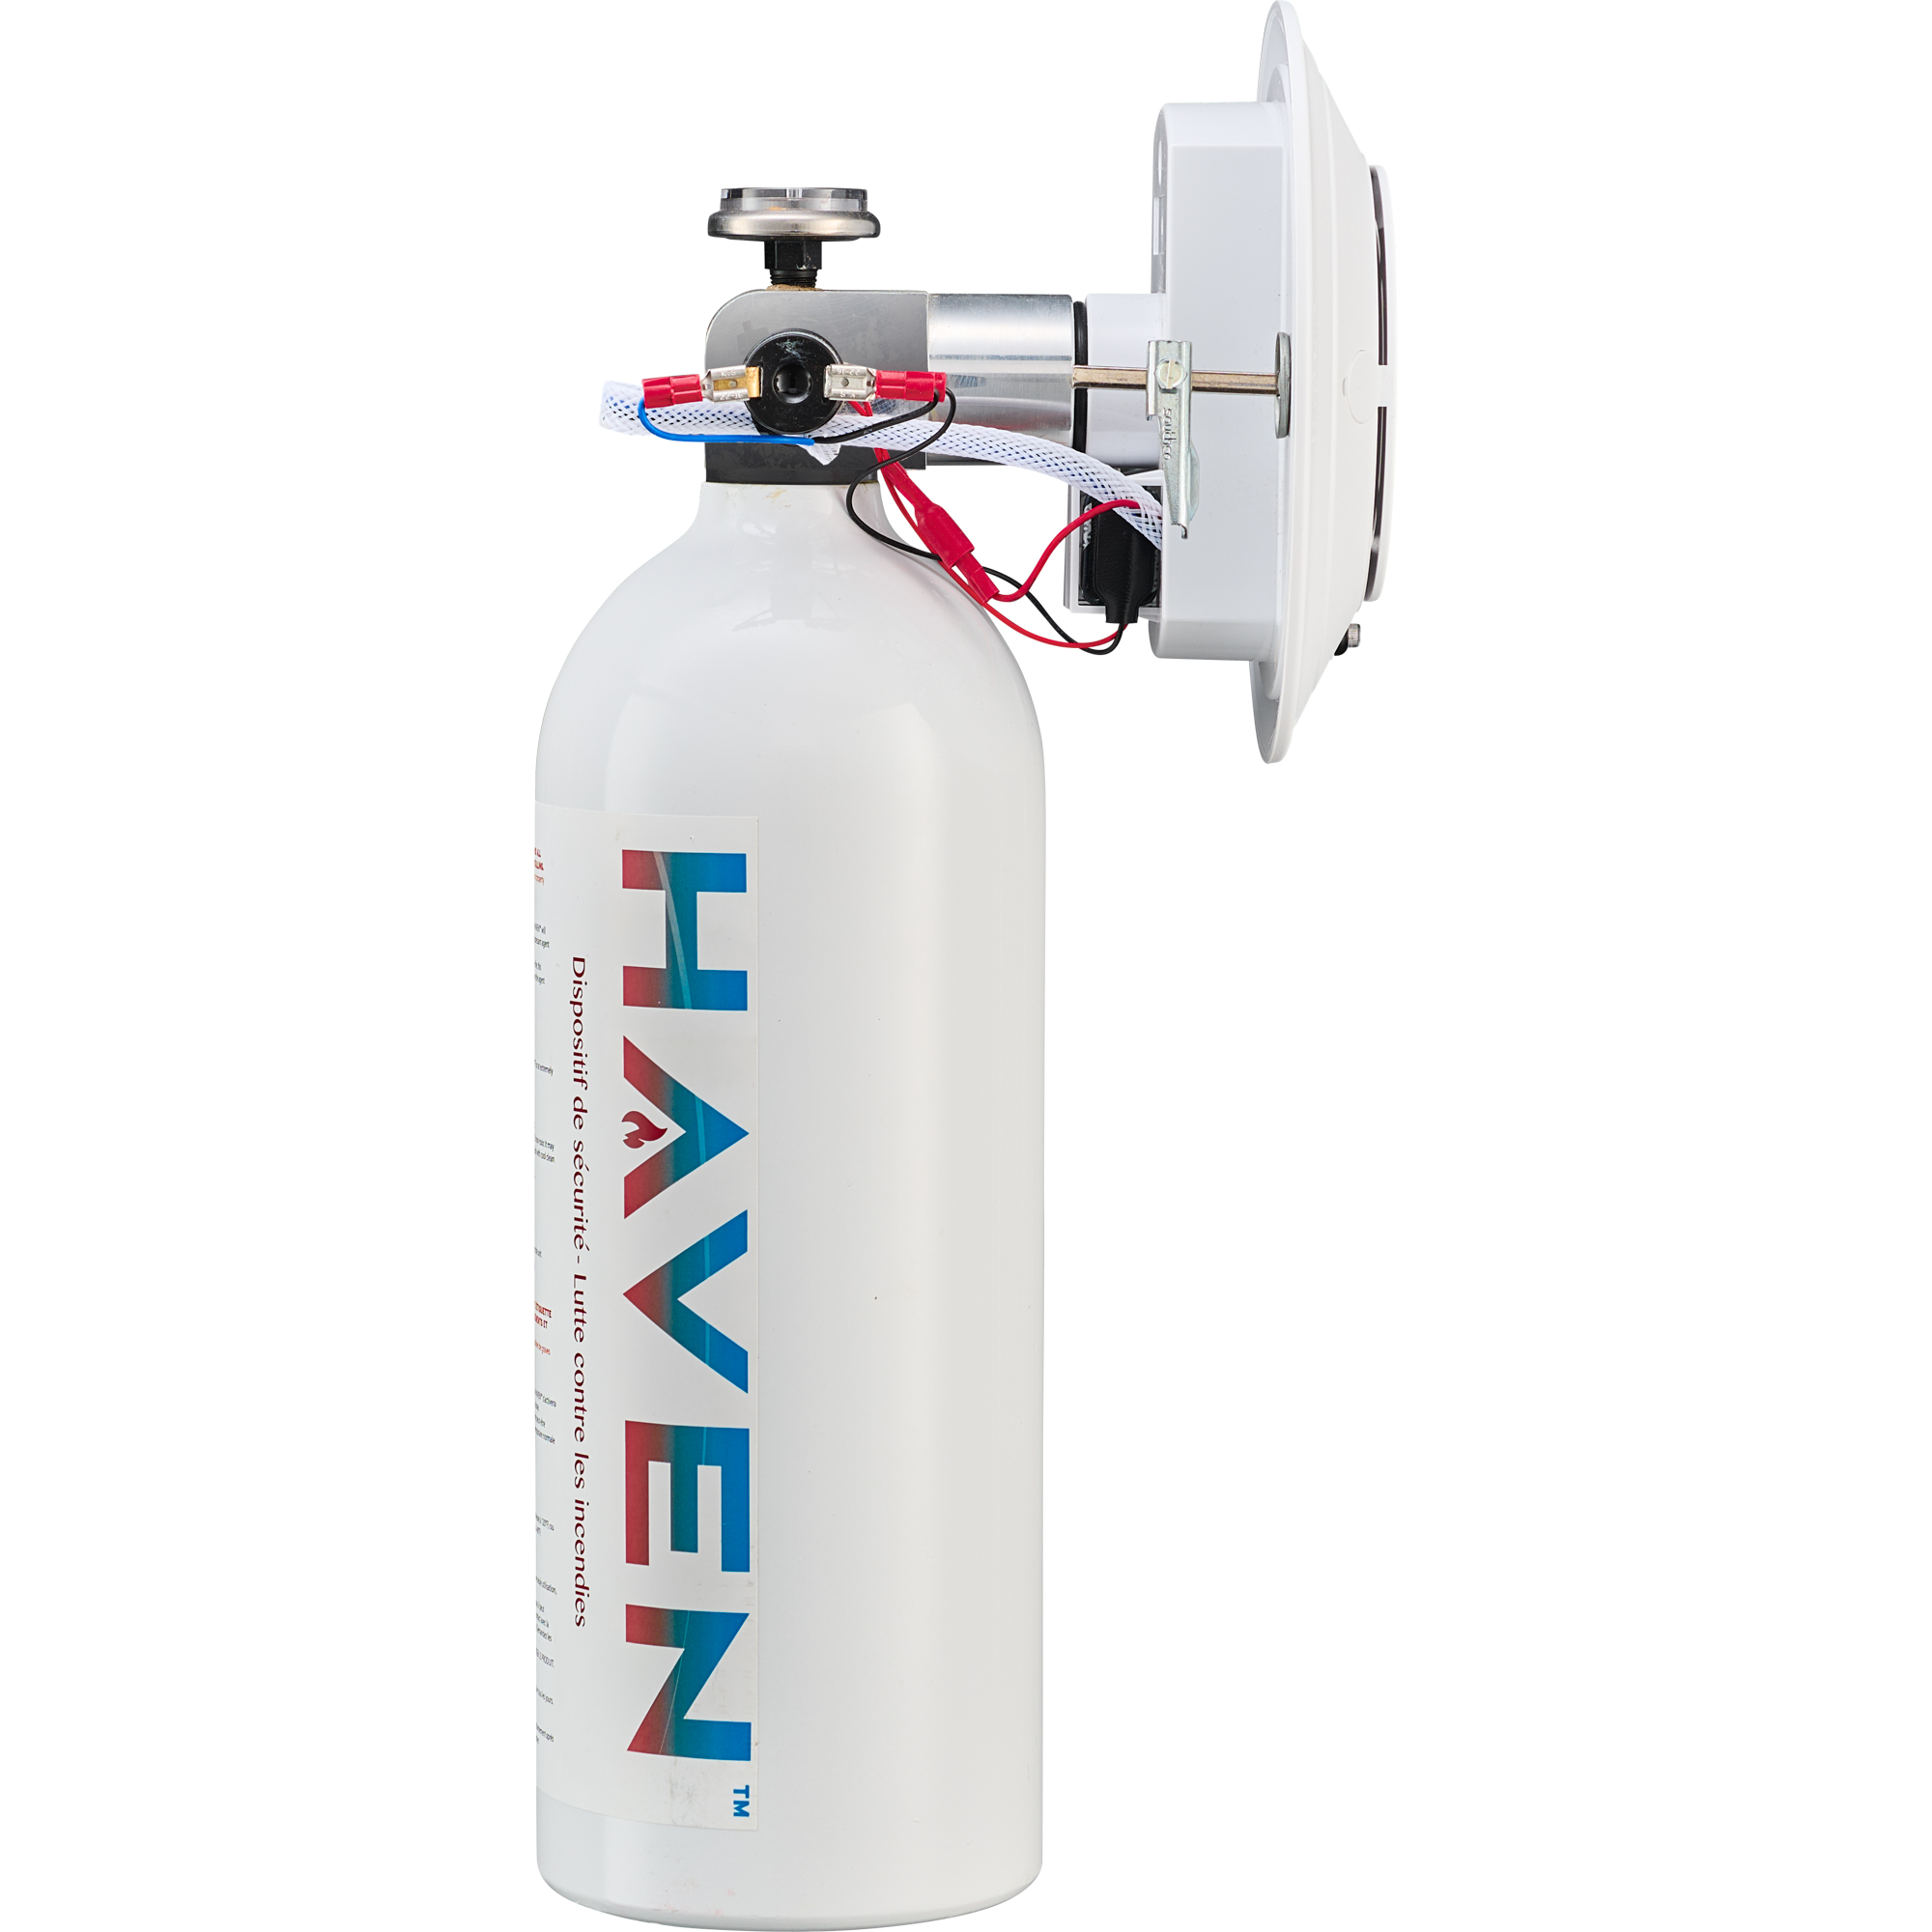 HAVEN Fire Suppression Safety Device 135F - 57C Rated (Preorder)